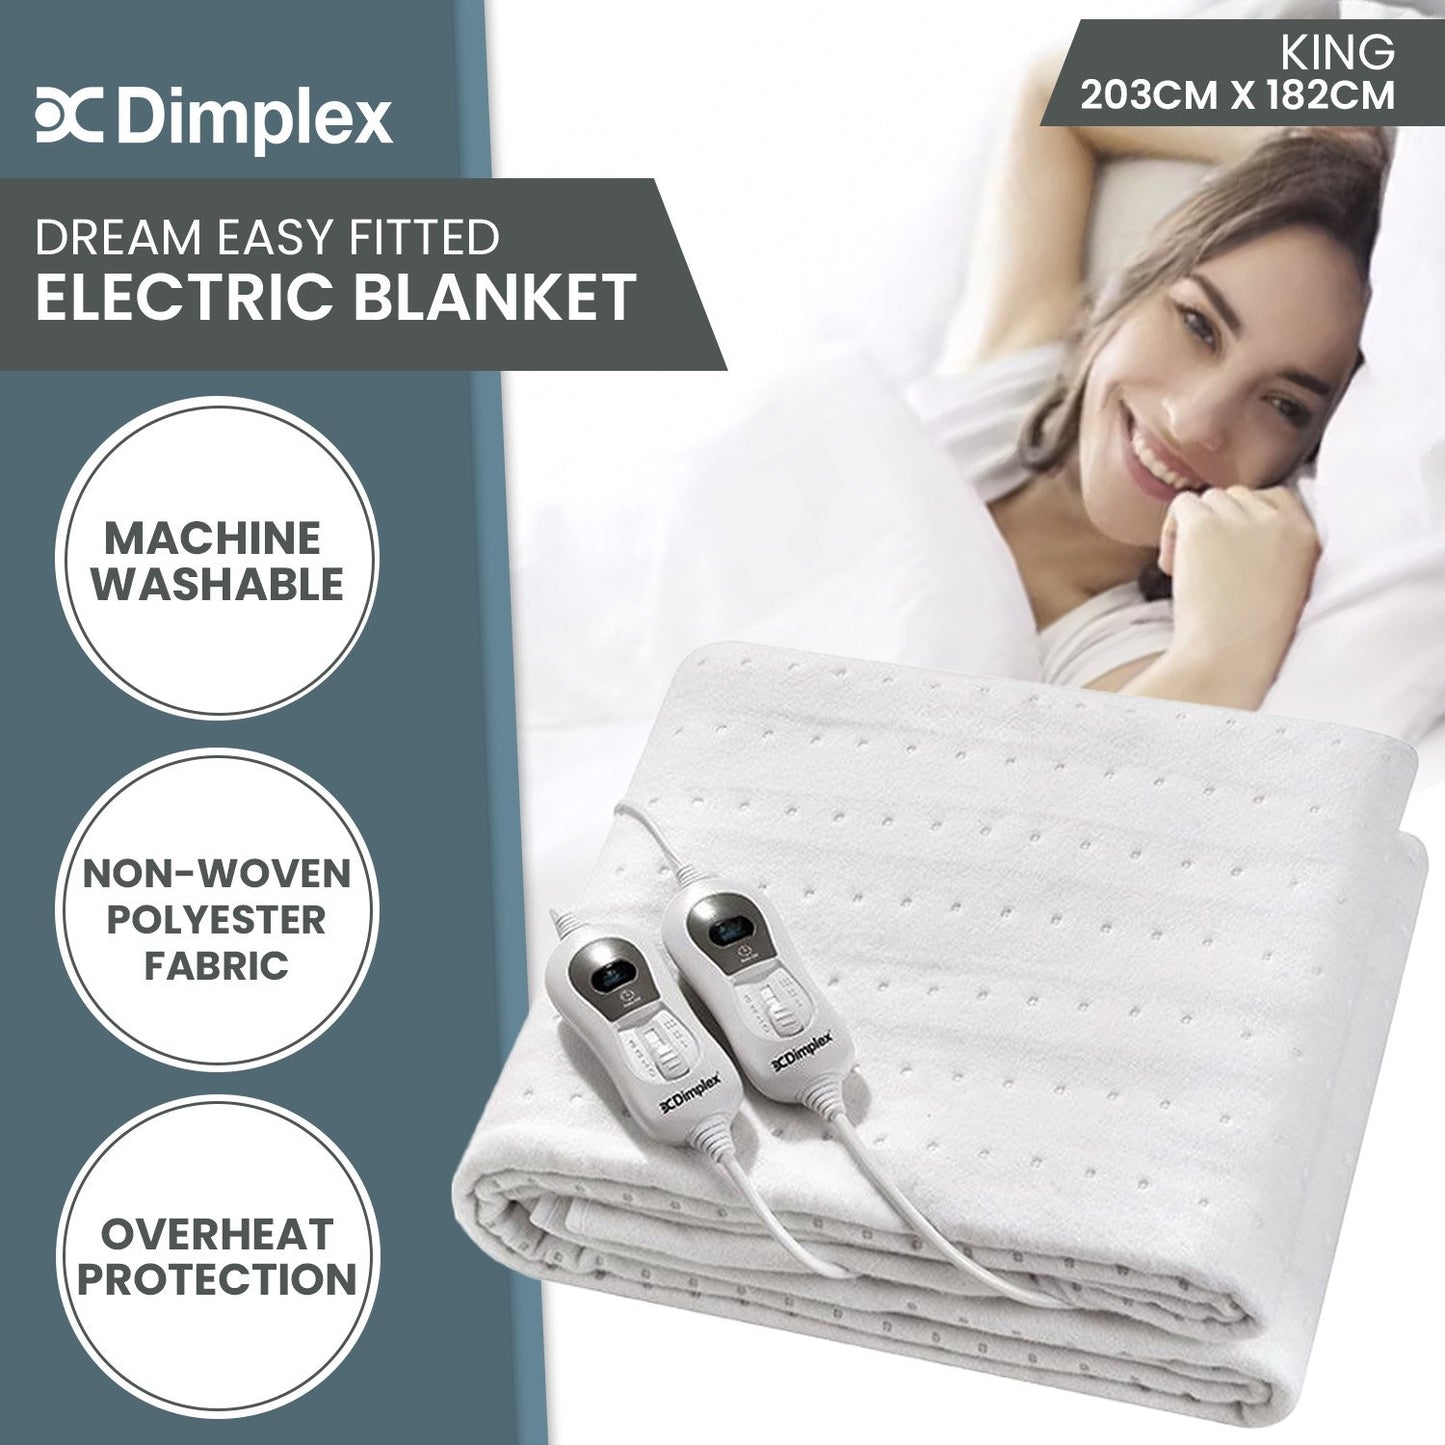 Dimplex Dream Easy Fitted King-size Electric Blanket